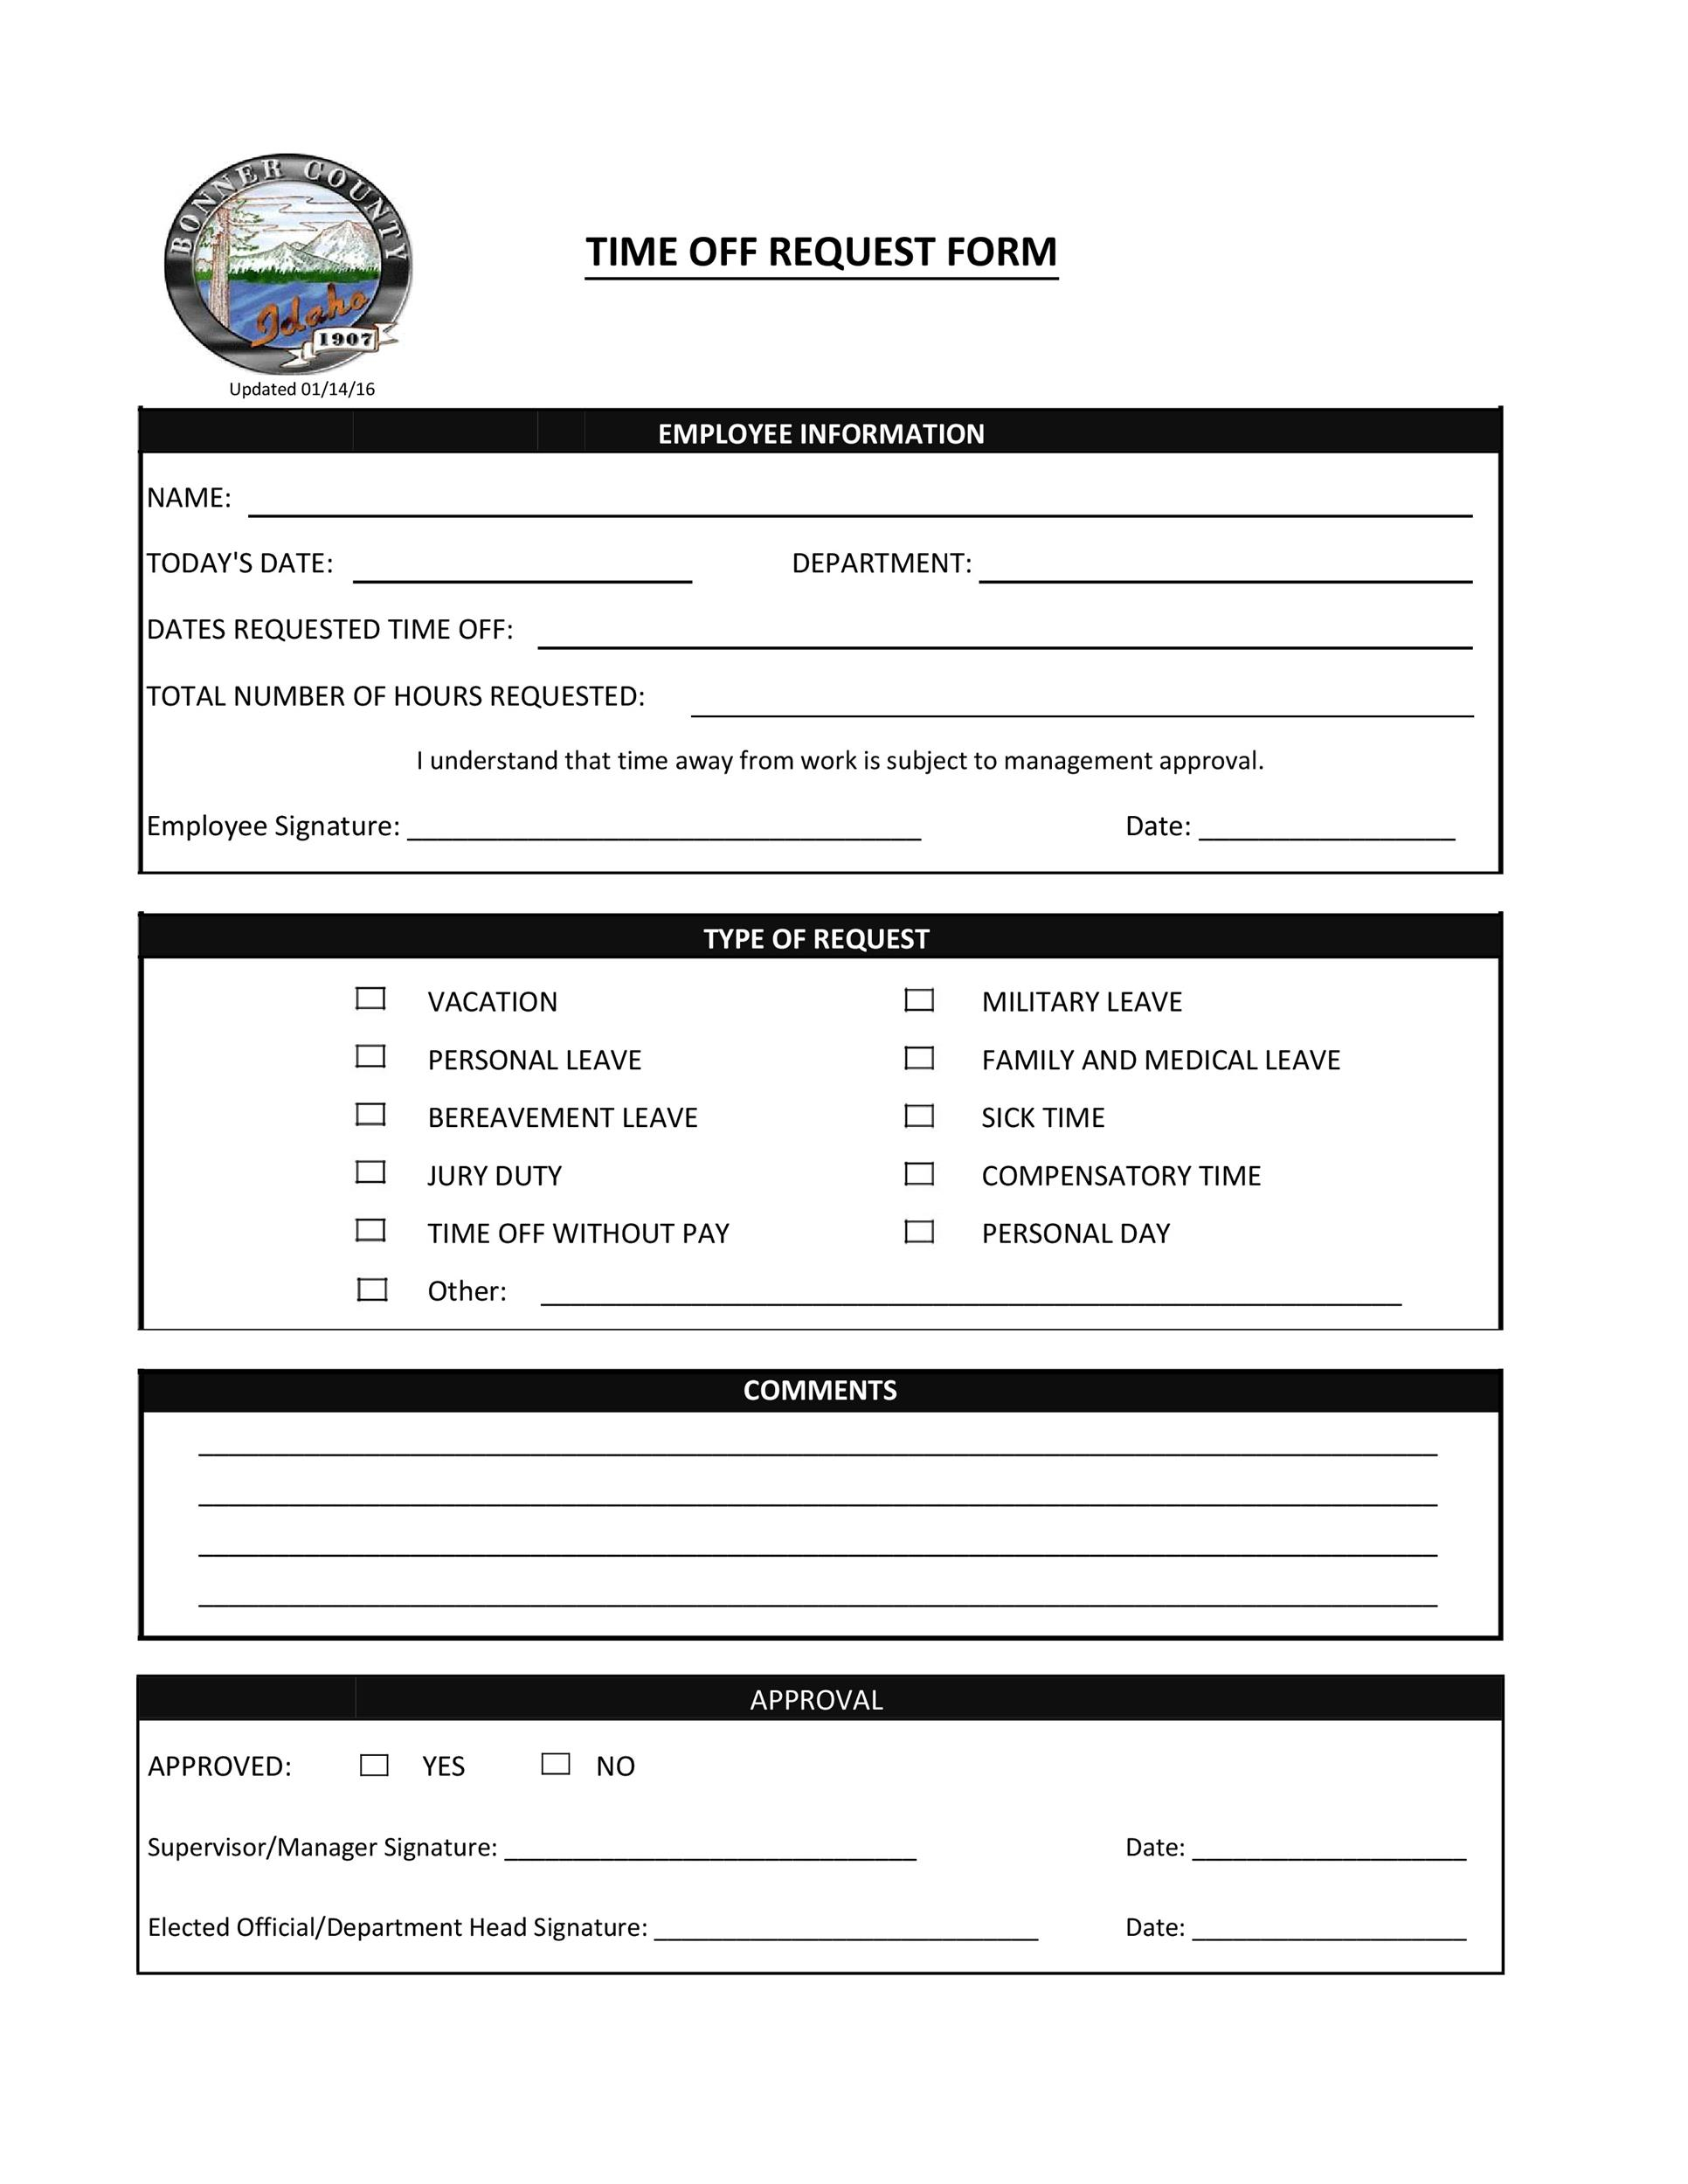 Time Off Request Form Templates PDF Word Sample